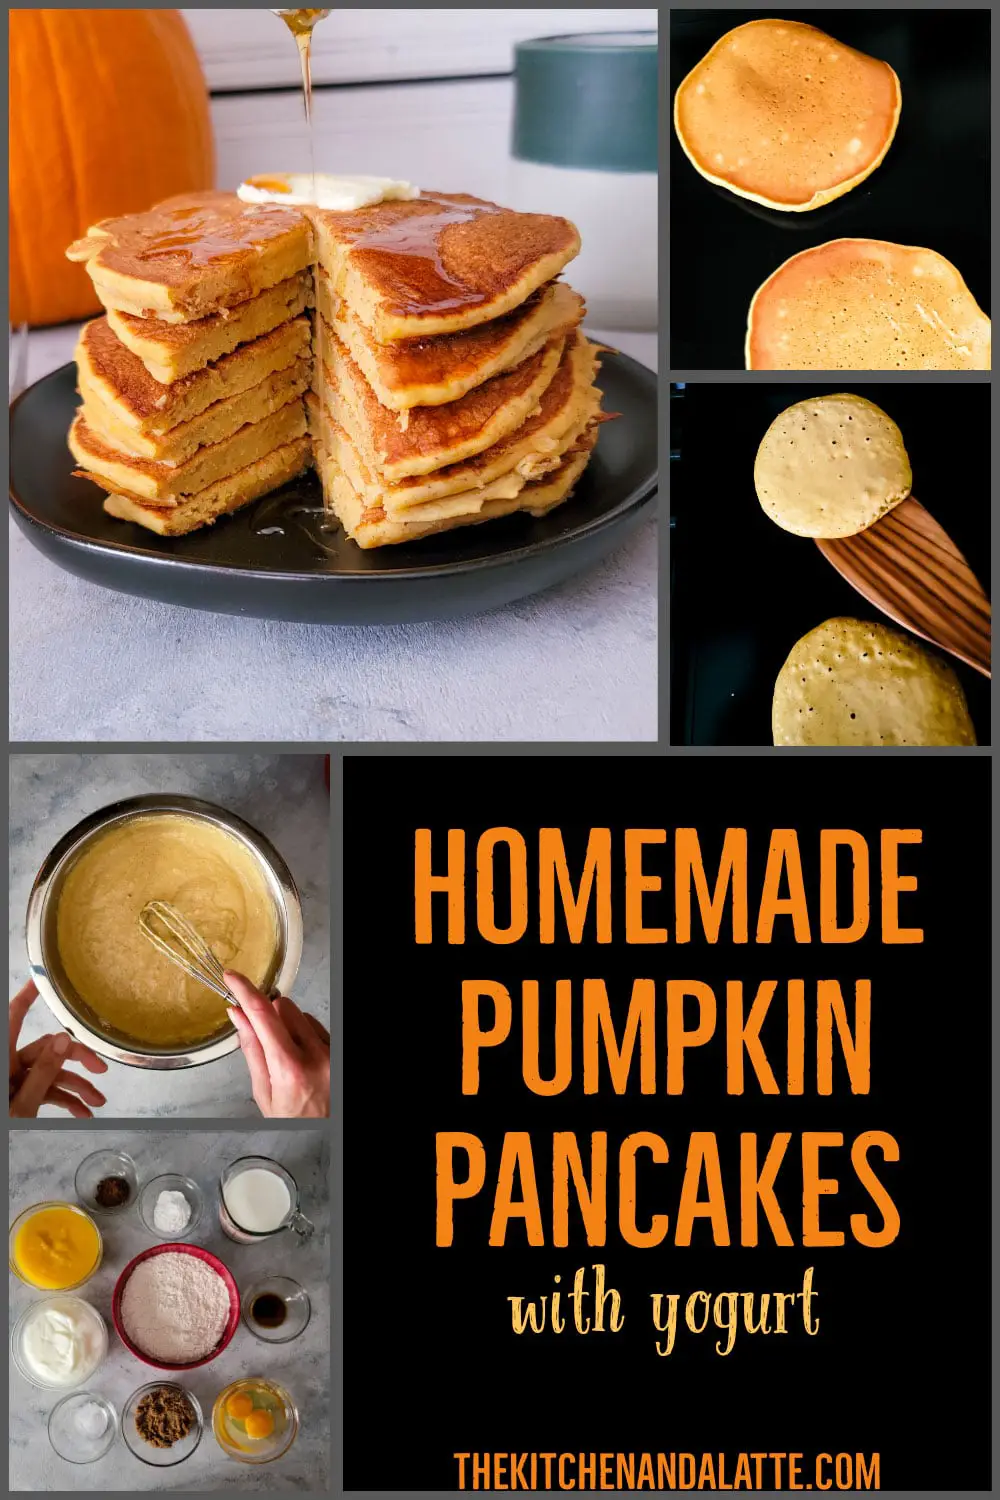 Pinterest image text - homemade pumpkin pancakes. 5 pictures - the ingredients, the prepared batter, batter on the griddle, pancake after flipping and a stack of pancakes on a plate to be served.